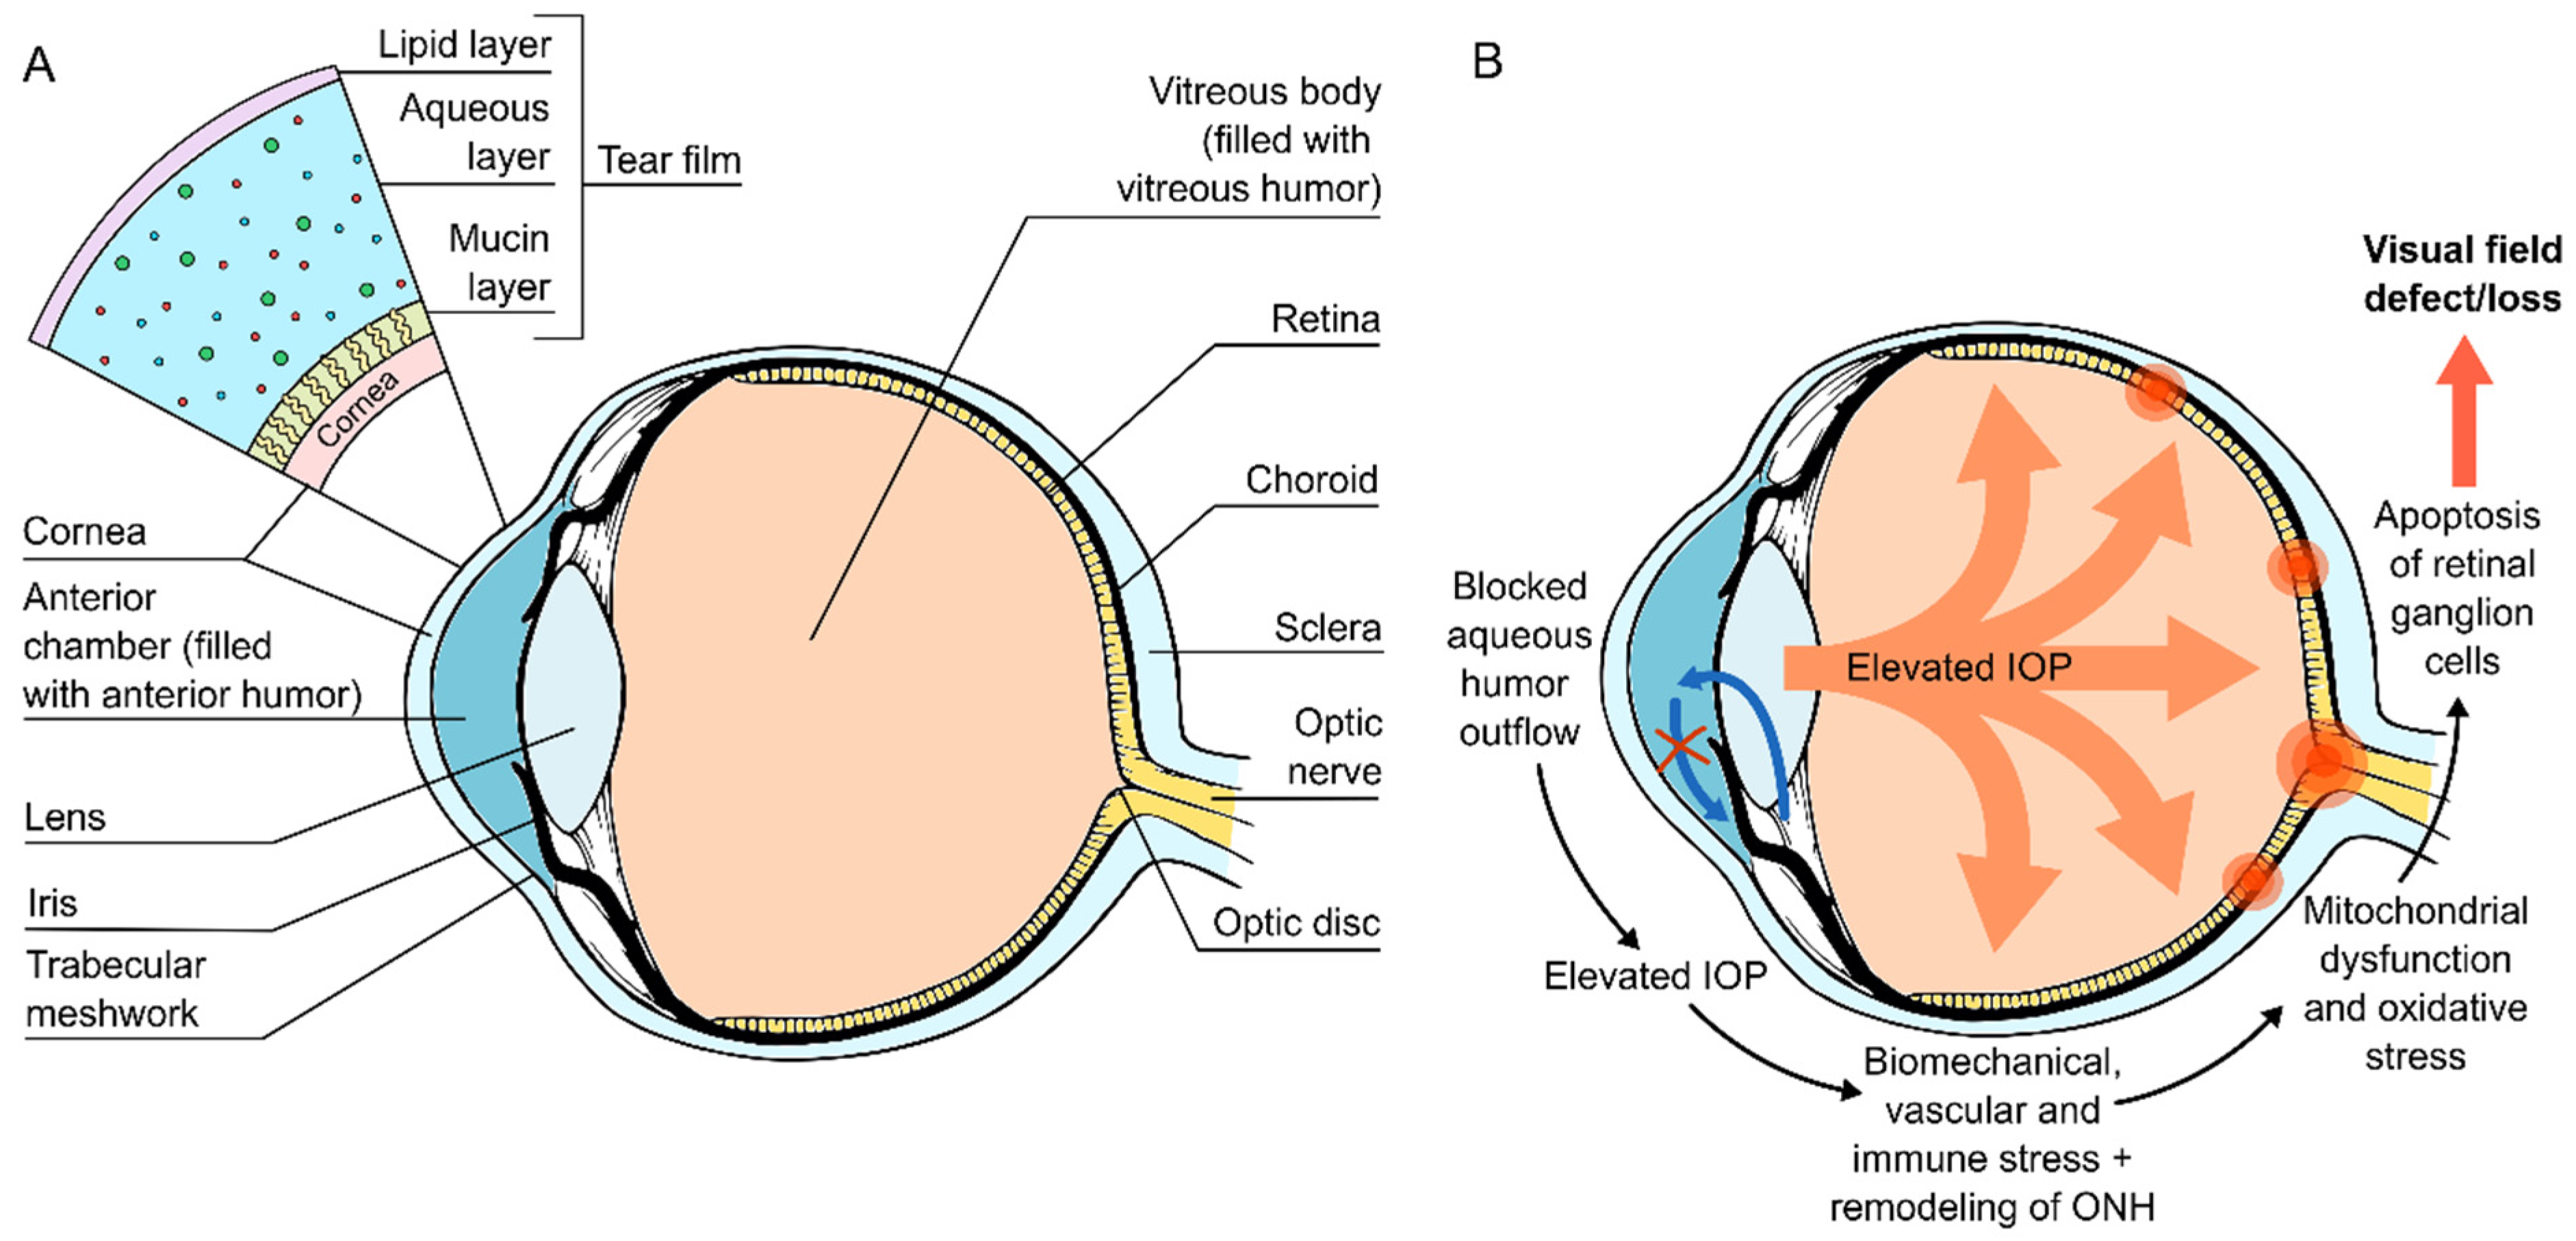 IJMS | Free Full-Text | Clinical Tear Fluid Proteomics&mdash;A Novel Tool  in Glaucoma Research